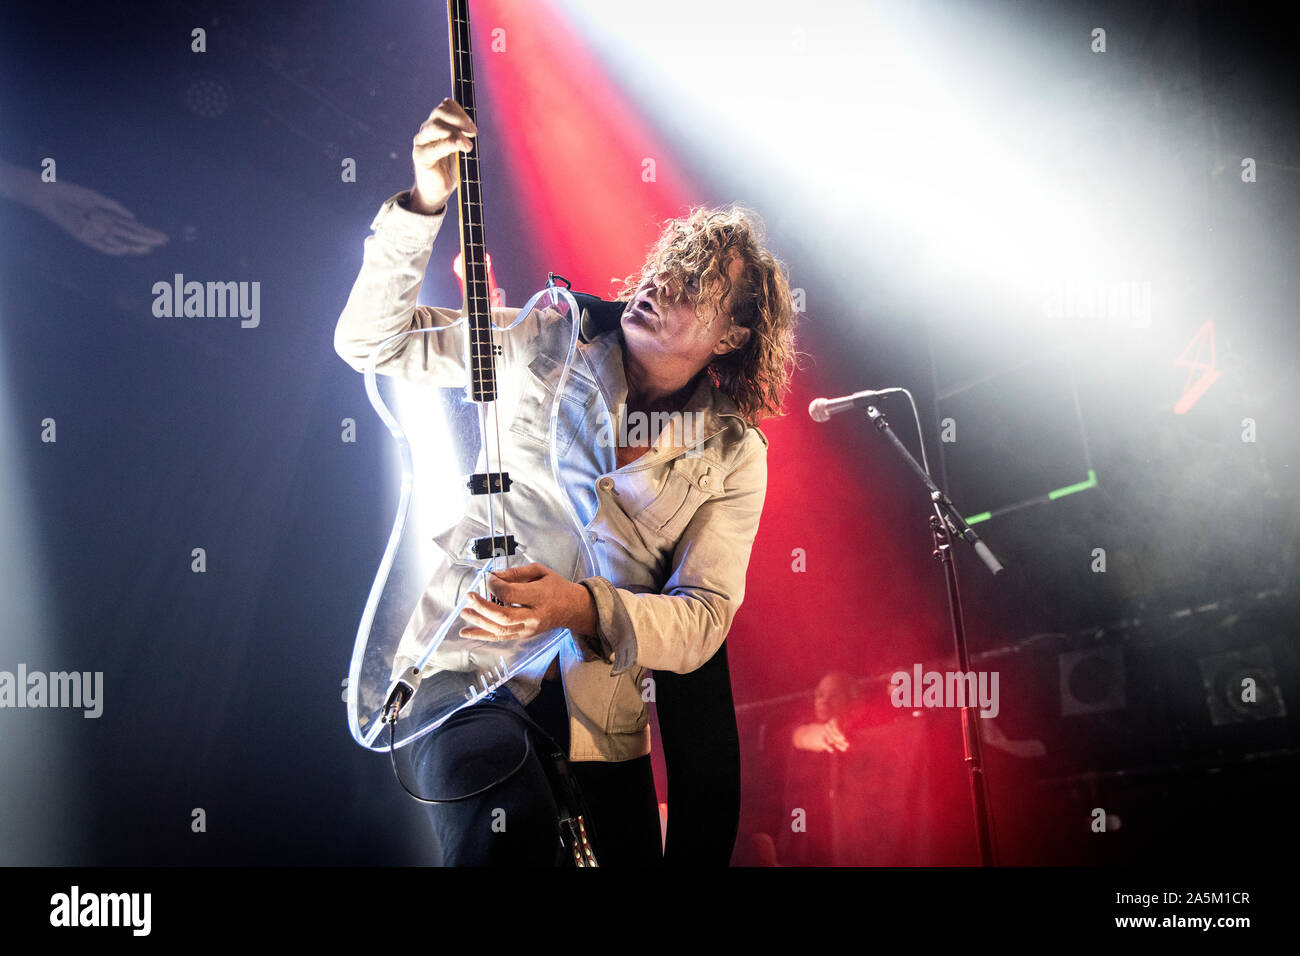 Oslo, Norway. 20th, October 2019. The Danish rock band D-A-D performs a live concert at Rockefeller in Oslo. Here bass player Stig Pedersen is seen live on stage. (Photo credit: Gonzales Photo - Terje Dokken). Stock Photo